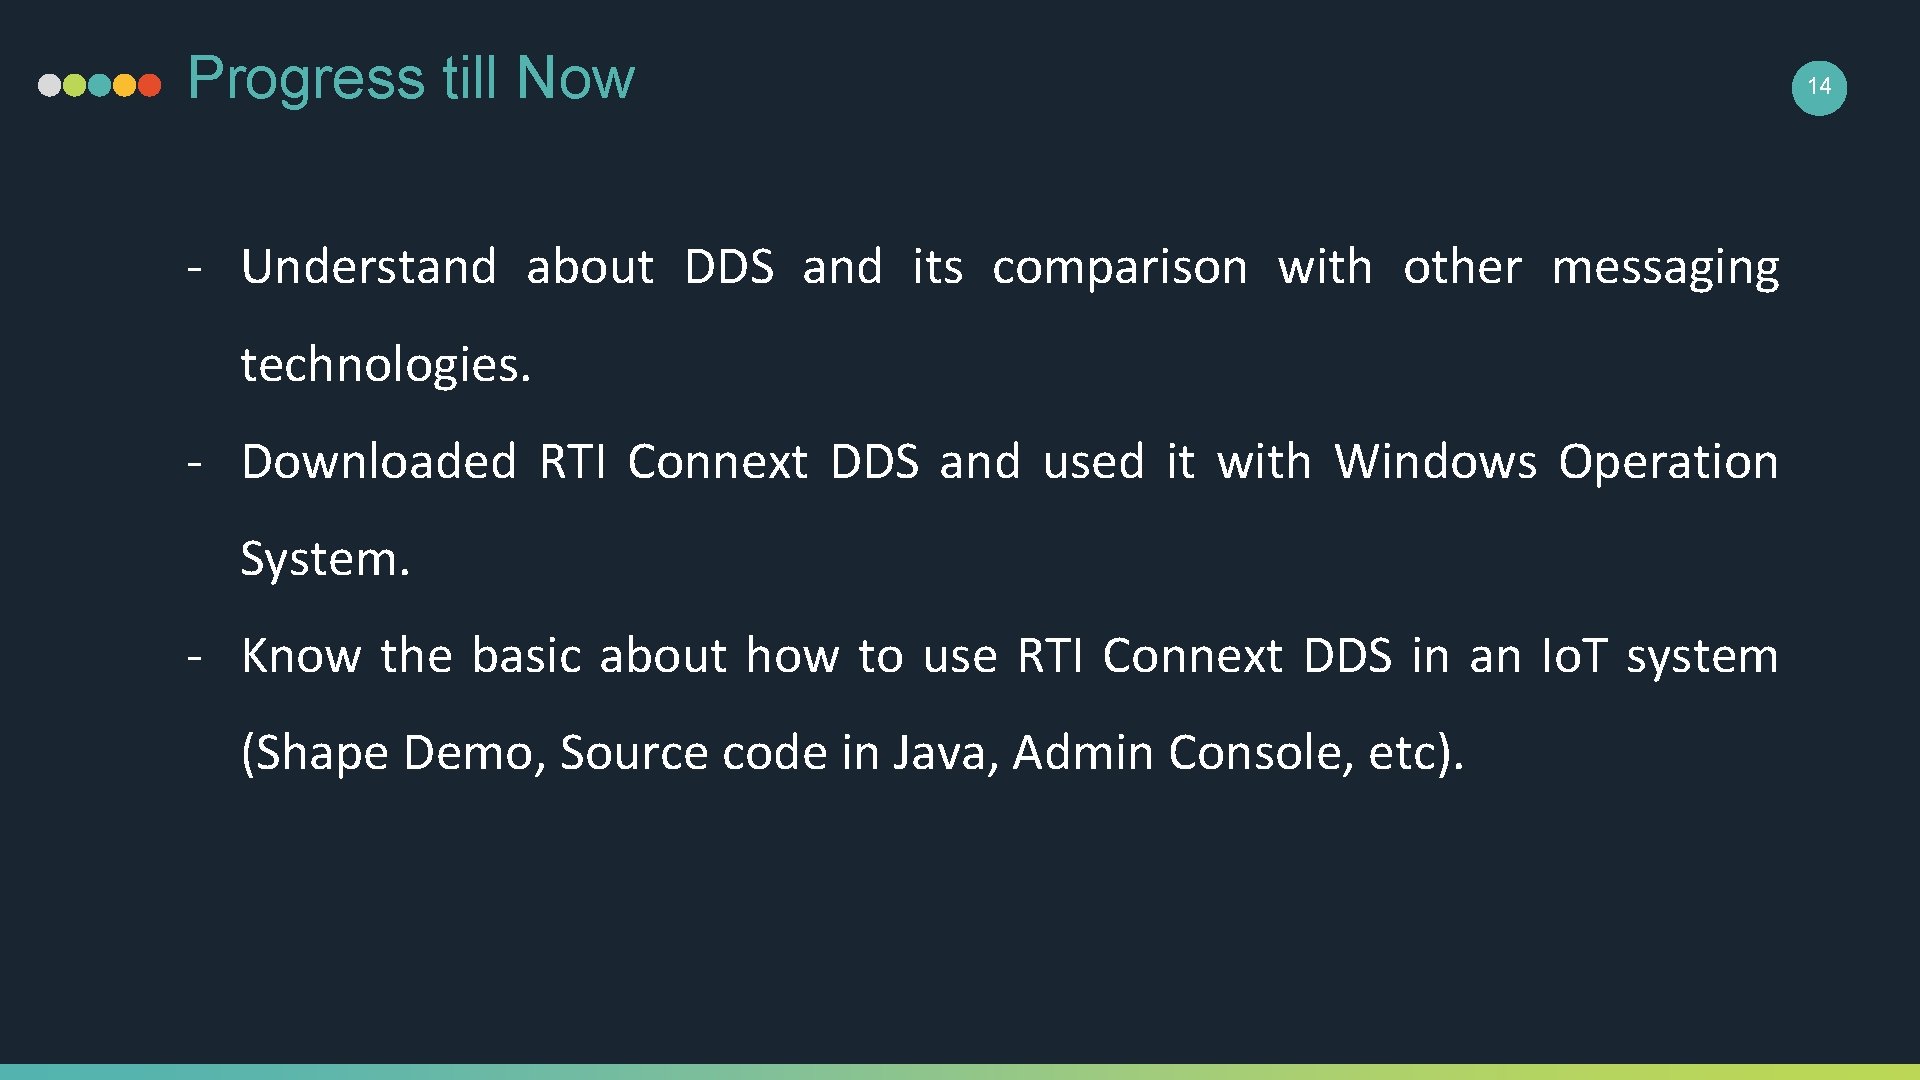 Progress till Now - Understand about DDS and its comparison with other messaging technologies.